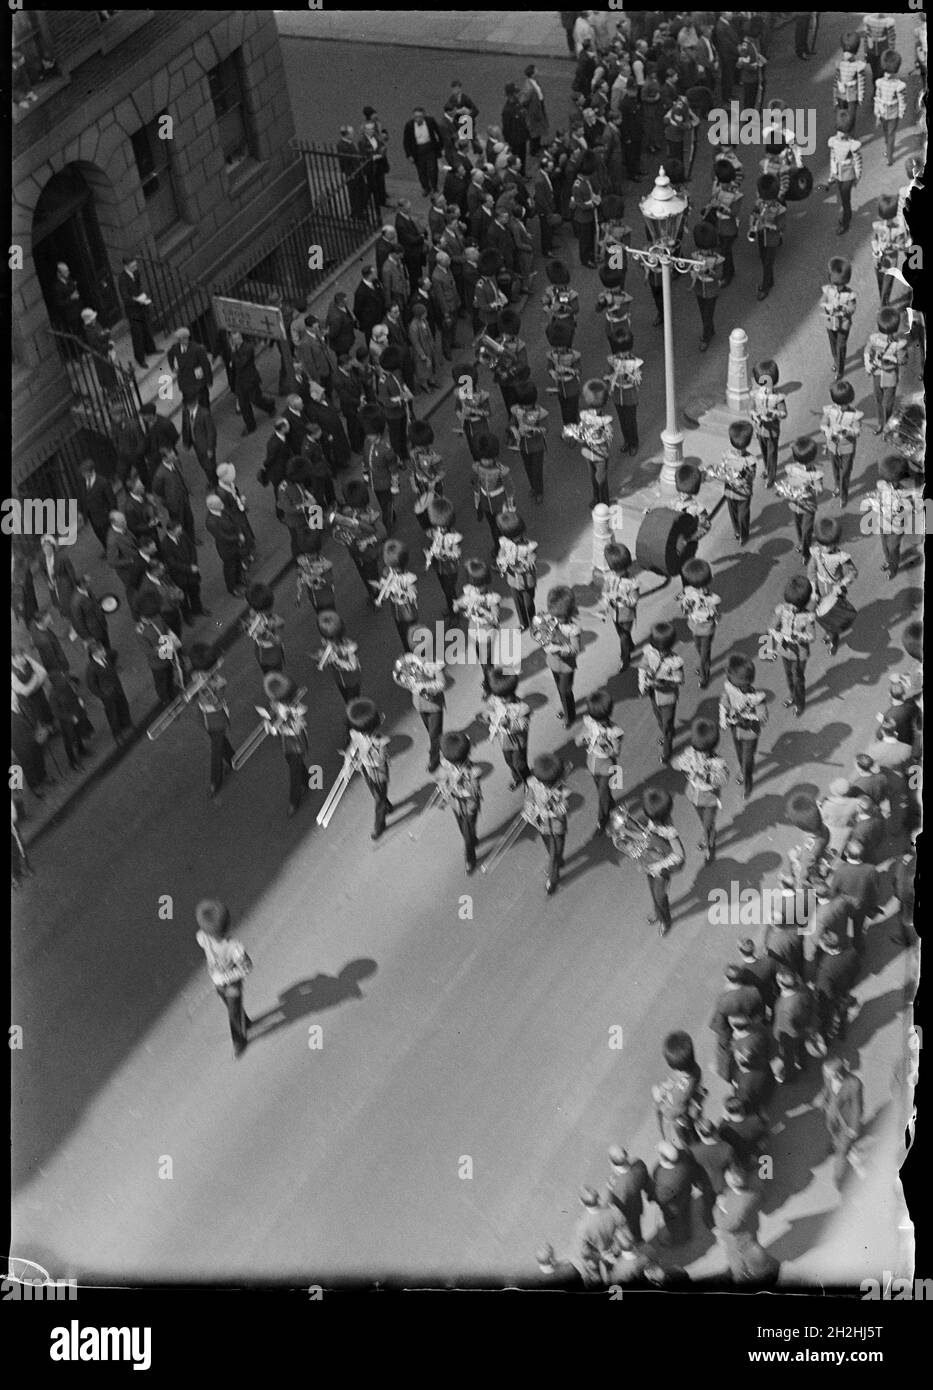 Funeral procession of a serviceman awarded the Victoria Cross, Greater London Authority, early 1930s. Looking down from a tall building towards a military band marching in the funeral procession of a serviceman awarded the Victoria Cross. On notes within the collection file, this photograph was given a title of 'Death of a Hero'. The parade appears to have been for the funeral of a soldier who had been awarded a Victoria Cross. The notes also mention that the photograph was exhibited at the Royal Photographic Society and reproduced in Woman's Journal, July 1933. Stock Photo